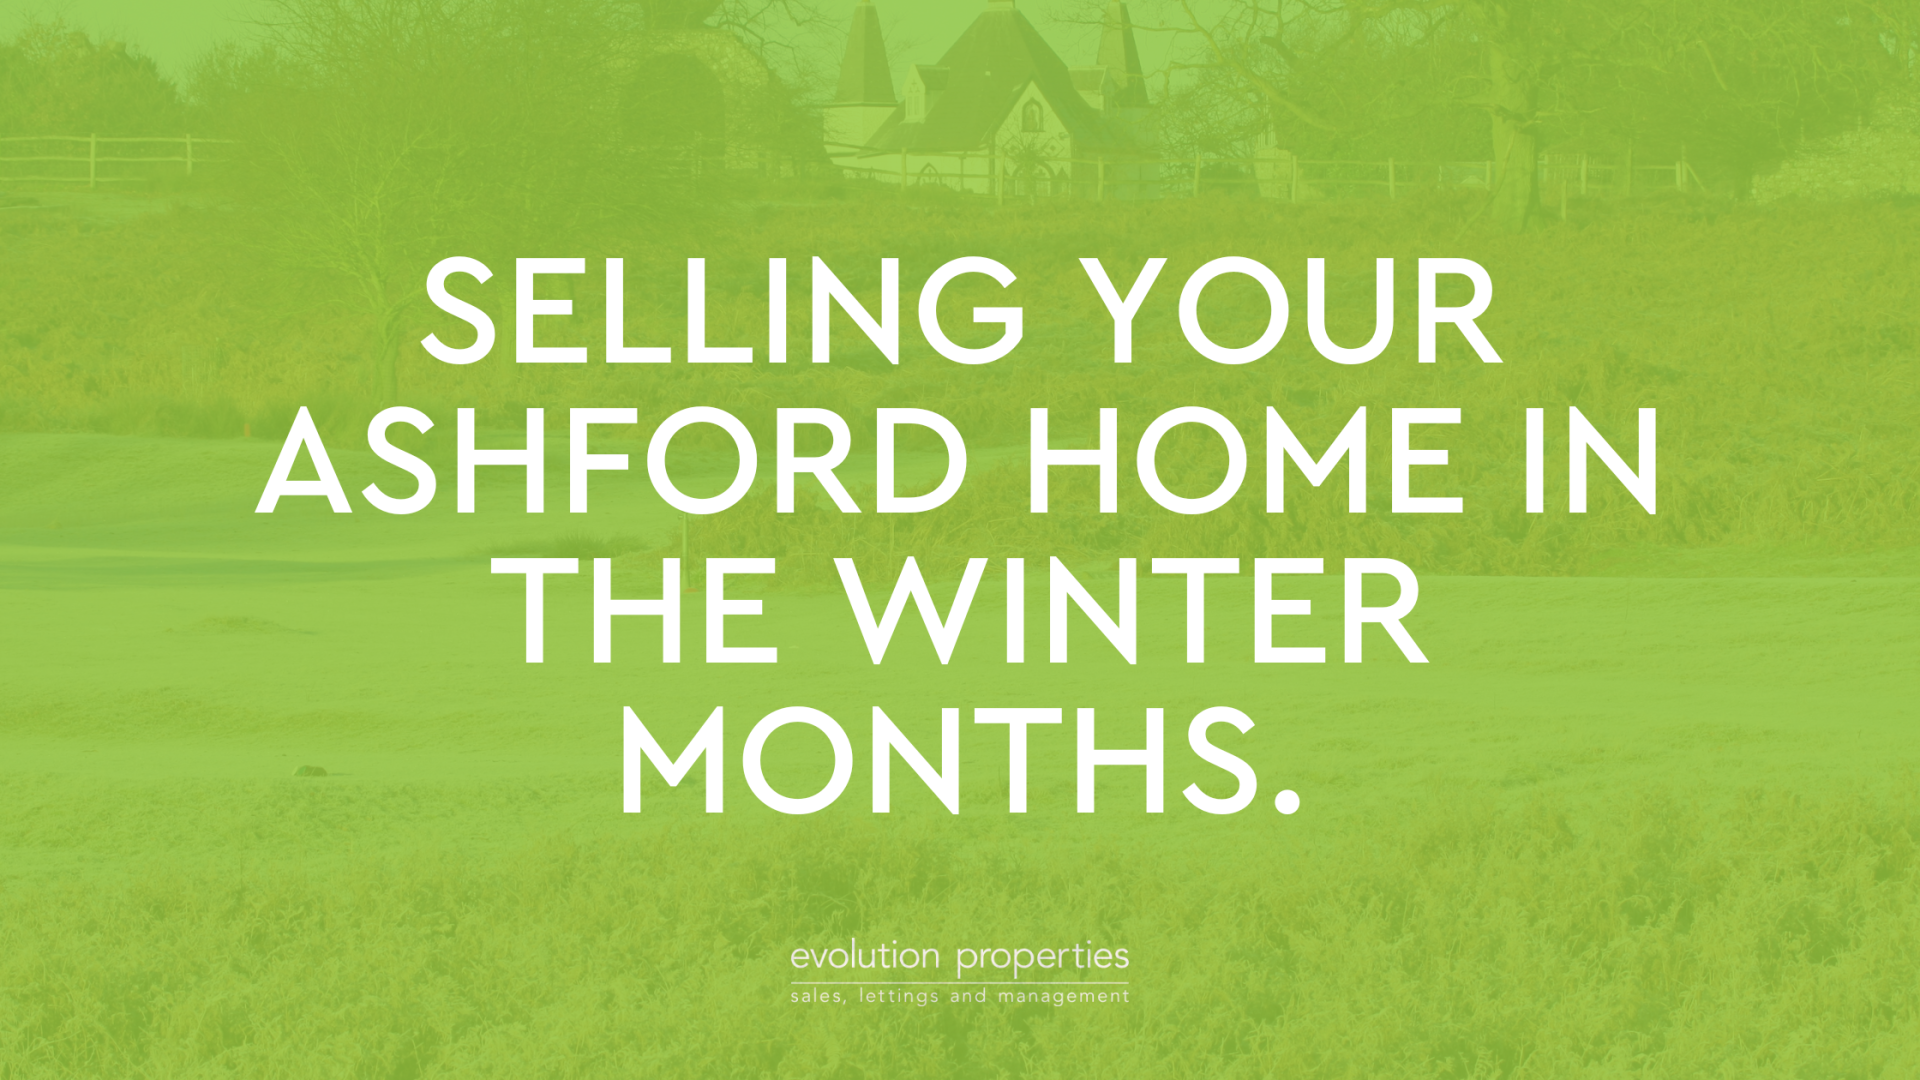 Selling your Ashford home in the winter months